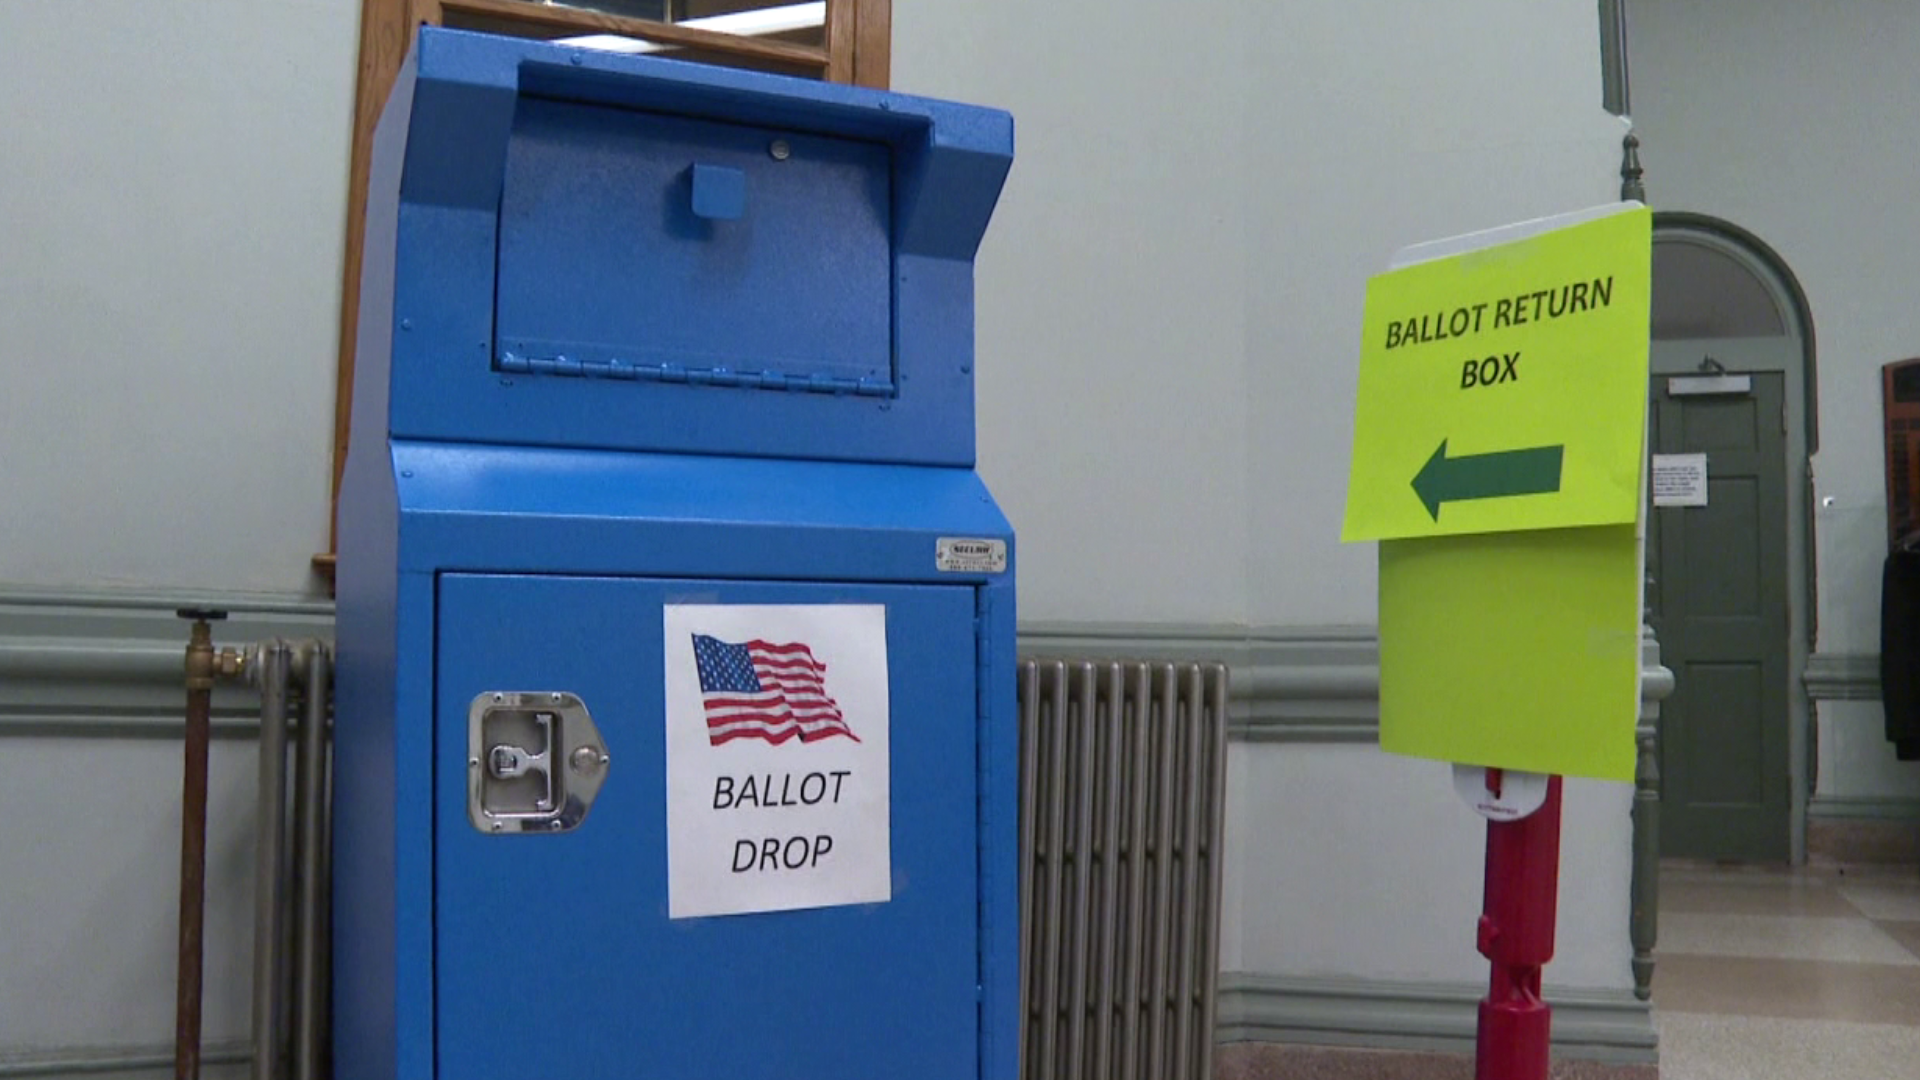 Voters are able to place their mail-in ballots in a secure box inside the county courthouse.